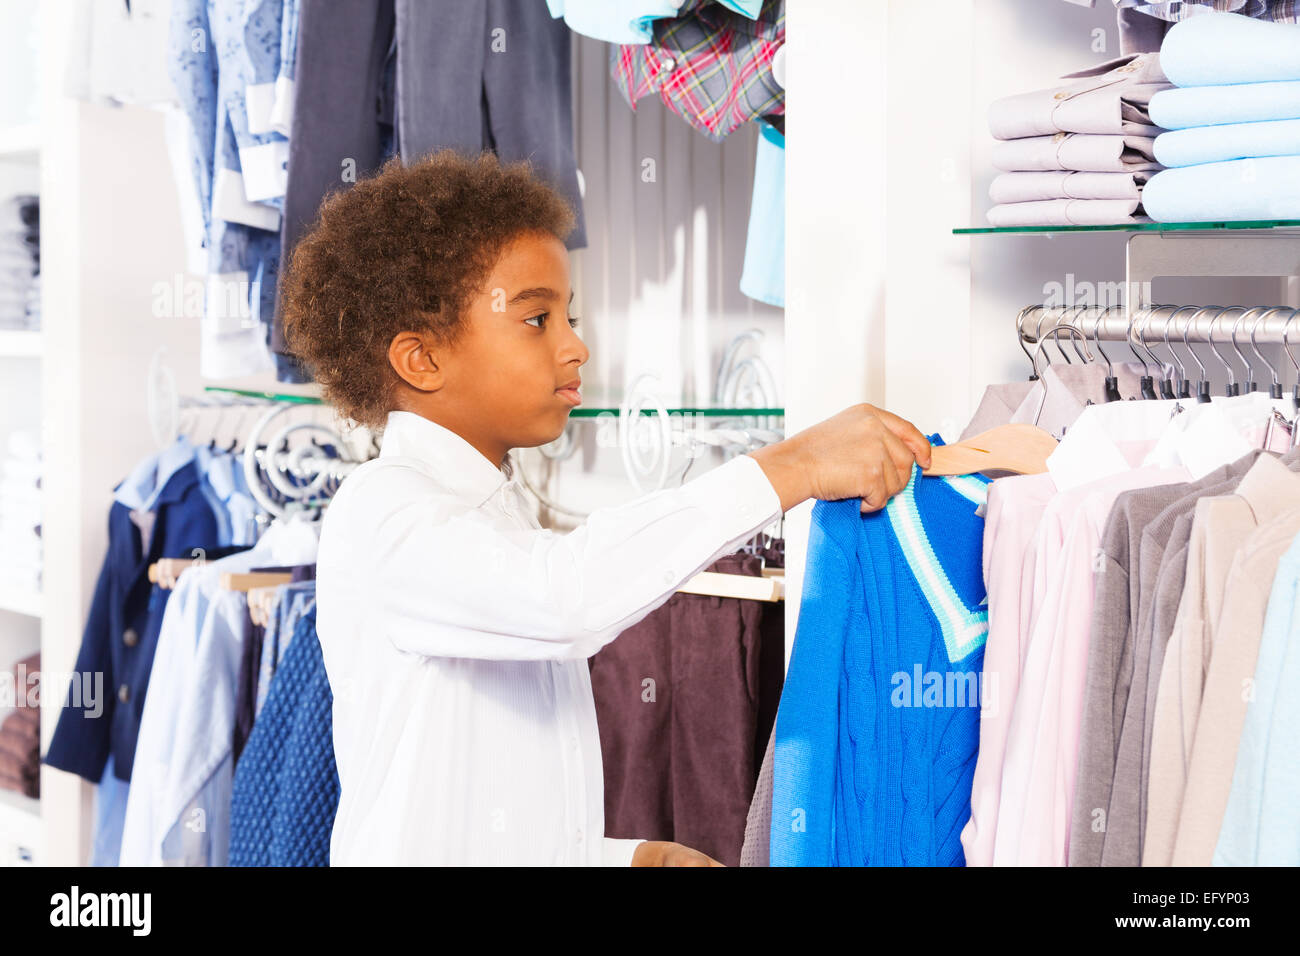 Small African boy in white shirts choosing clothes Stock Photo